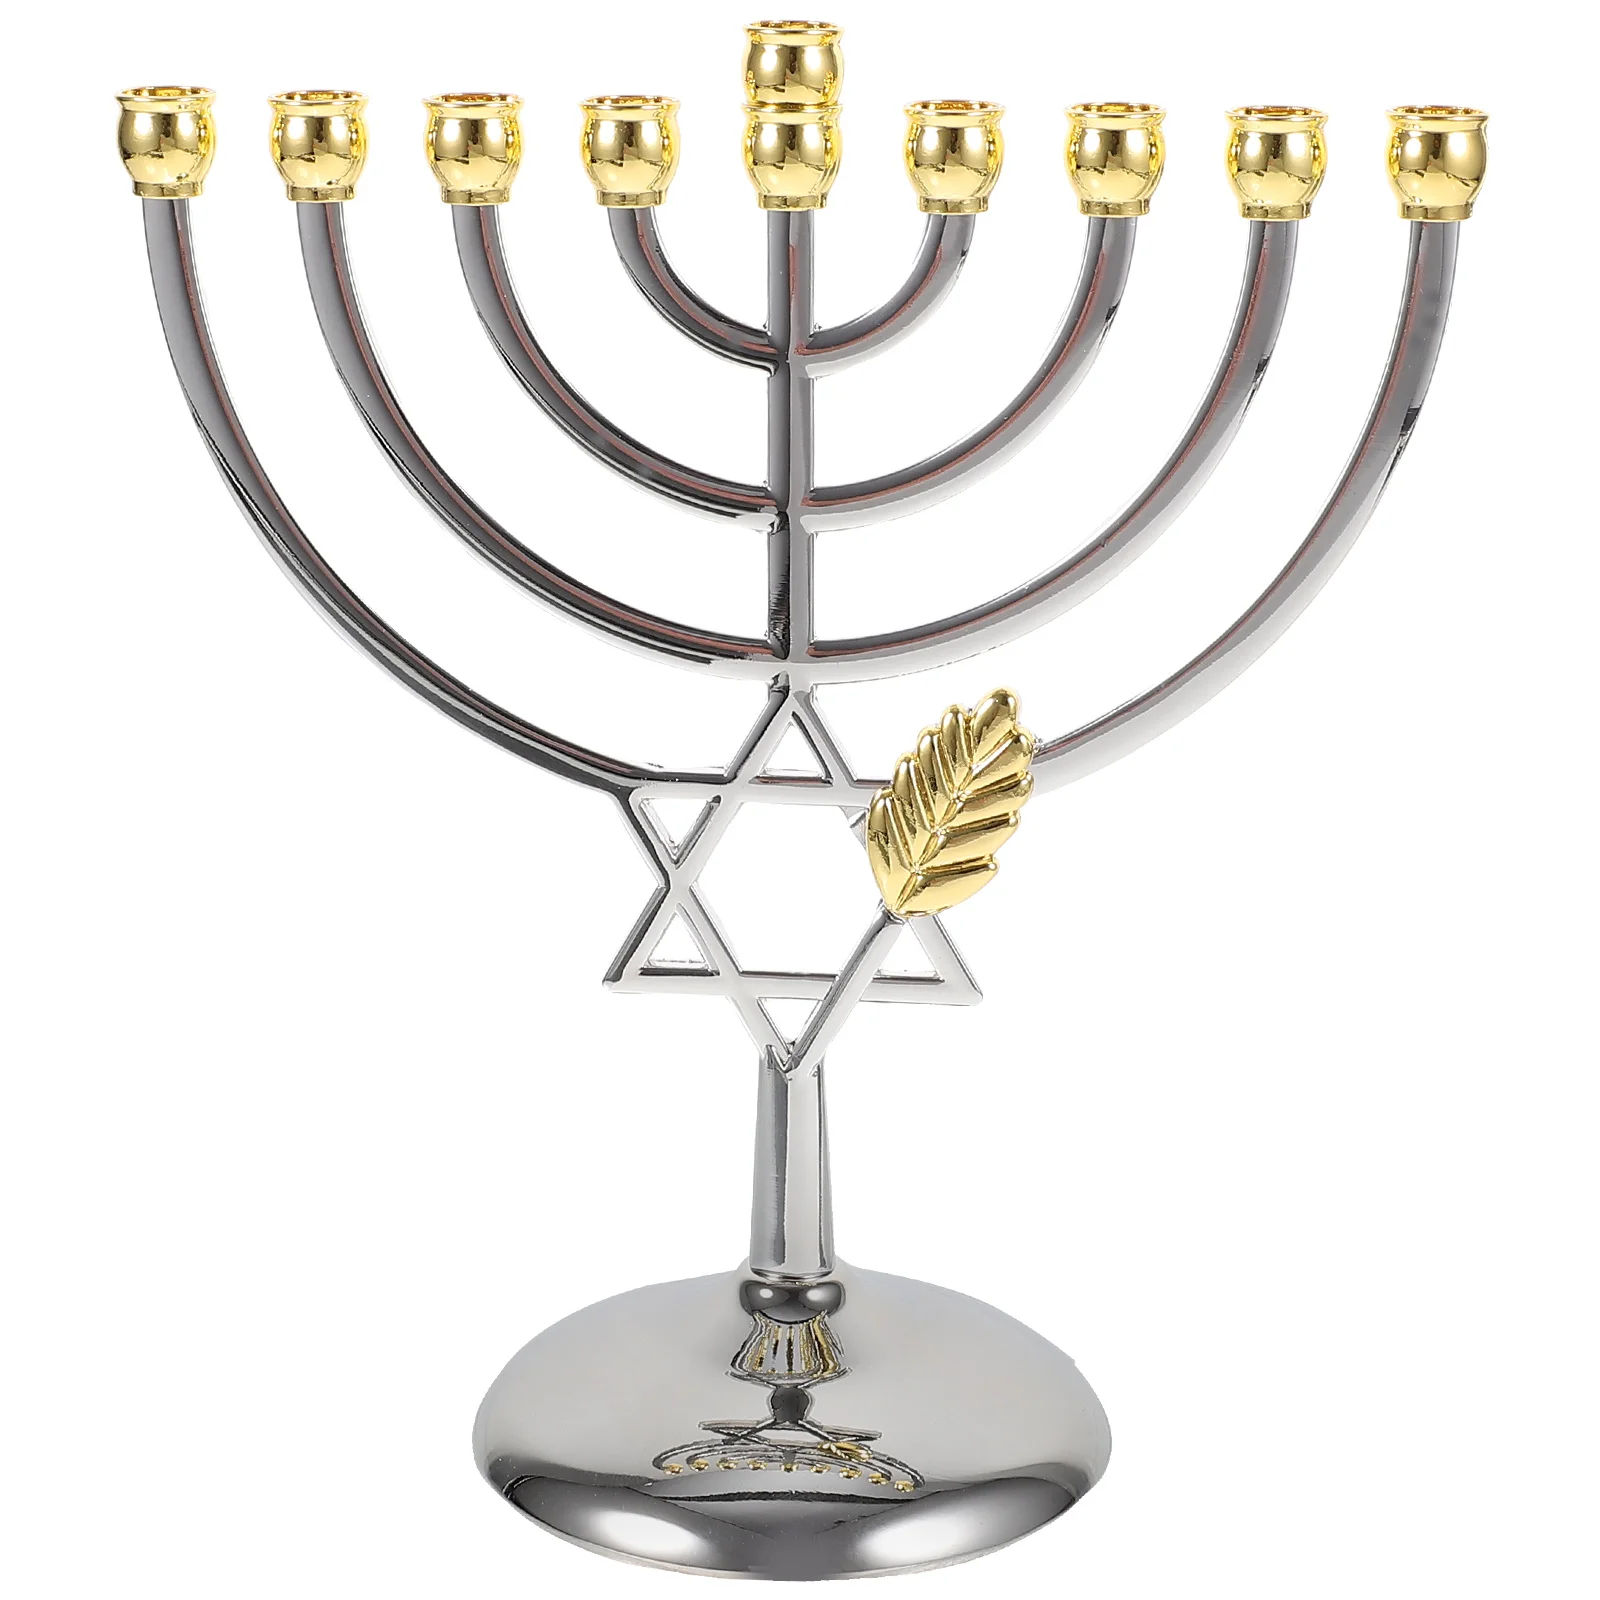 

Jewish Candle Holder 9 Branch Candlestick Metal Candle Holder Hanukkah Candlestick Jewish Holders Menorah Stand Table Candelabra